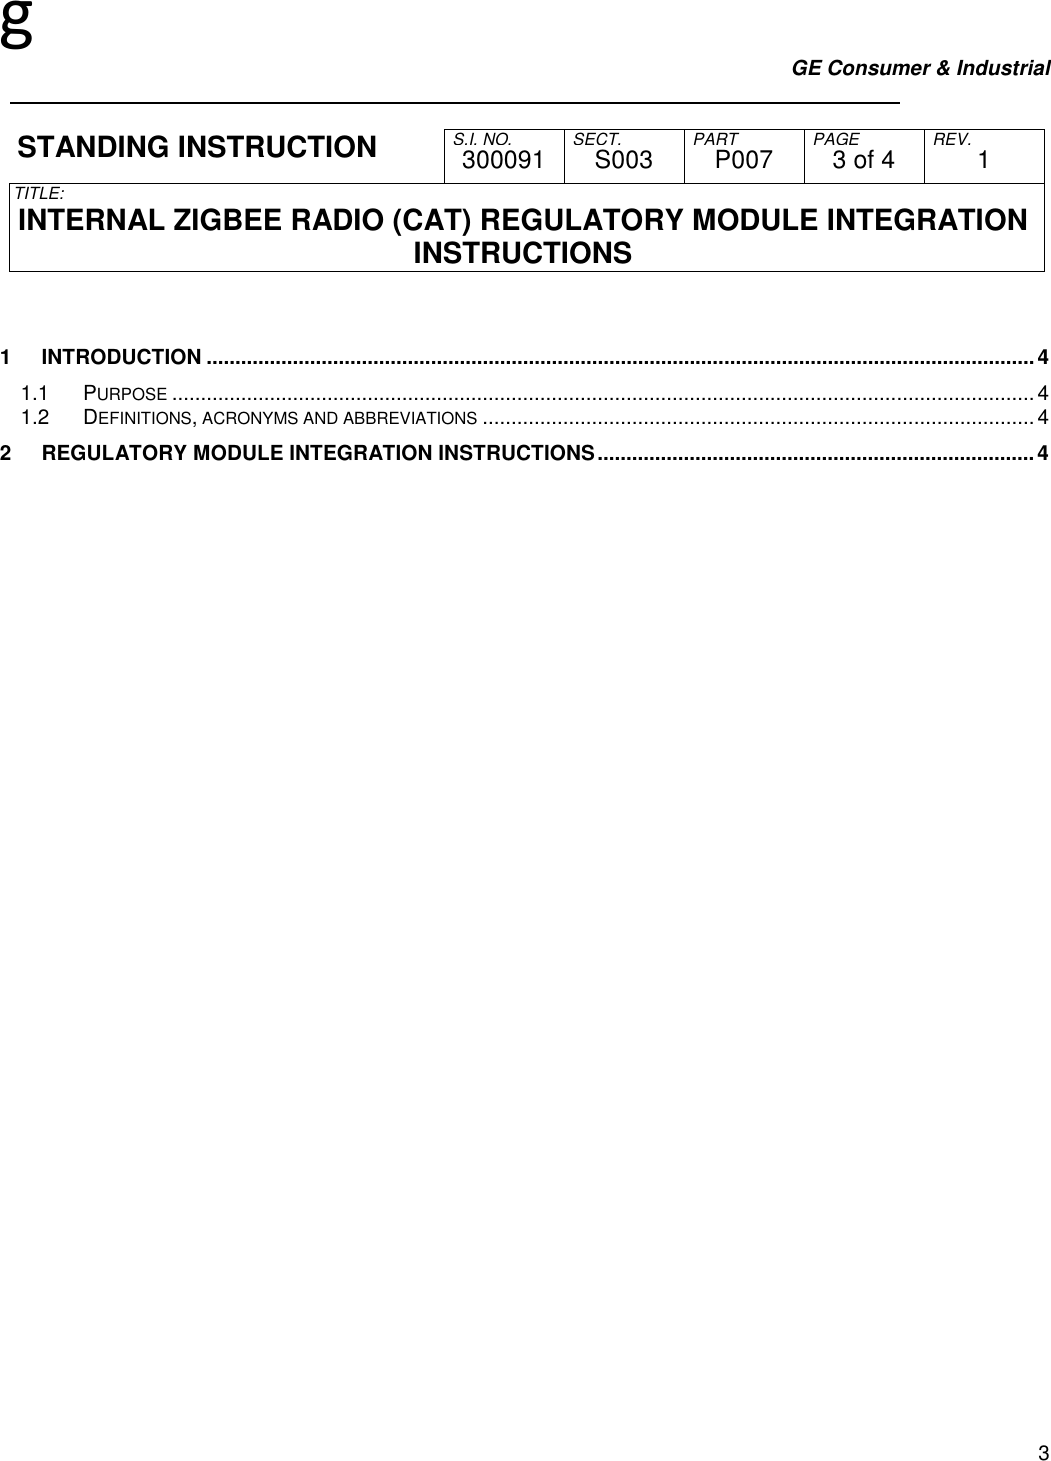 g GE Consumer &amp; Industrial     S.I. NO. SECT. PART PAGE REV. STANDING INSTRUCTION  300091  S003  P007  3 of 4  1 TITLE:  INTERNAL ZIGBEE RADIO (CAT) REGULATORY MODULE INTEGRATION INSTRUCTIONS   3  1 INTRODUCTION ................................................................................................................................................4 1.1 PURPOSE ......................................................................................................................................................4 1.2 DEFINITIONS, ACRONYMS AND ABBREVIATIONS ................................................................................................4 2 REGULATORY MODULE INTEGRATION INSTRUCTIONS............................................................................4  